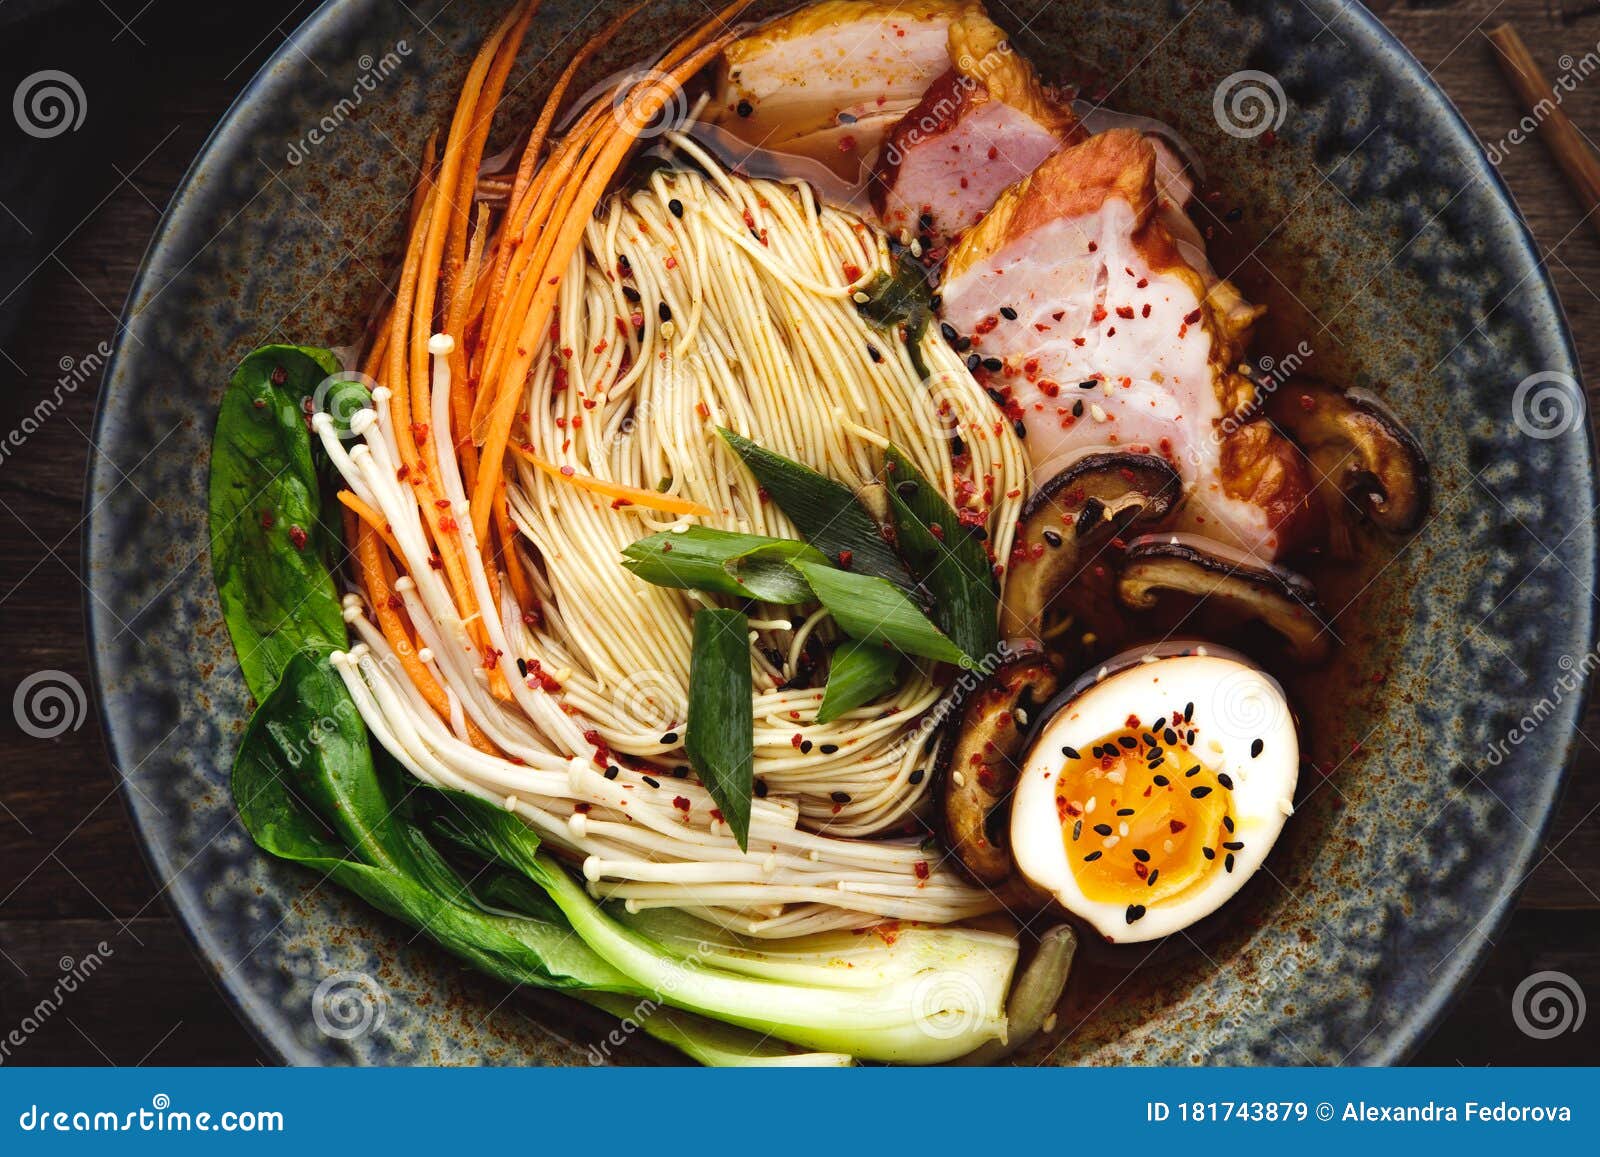 deformation vedhæng acceptere Bowl of Ramen Soup with Pork, Shiitake and Enoki Mushrooms, Marinated Egg  and Vegetables, Close Up. Stock Image - Image of dish, gourmet: 181743879